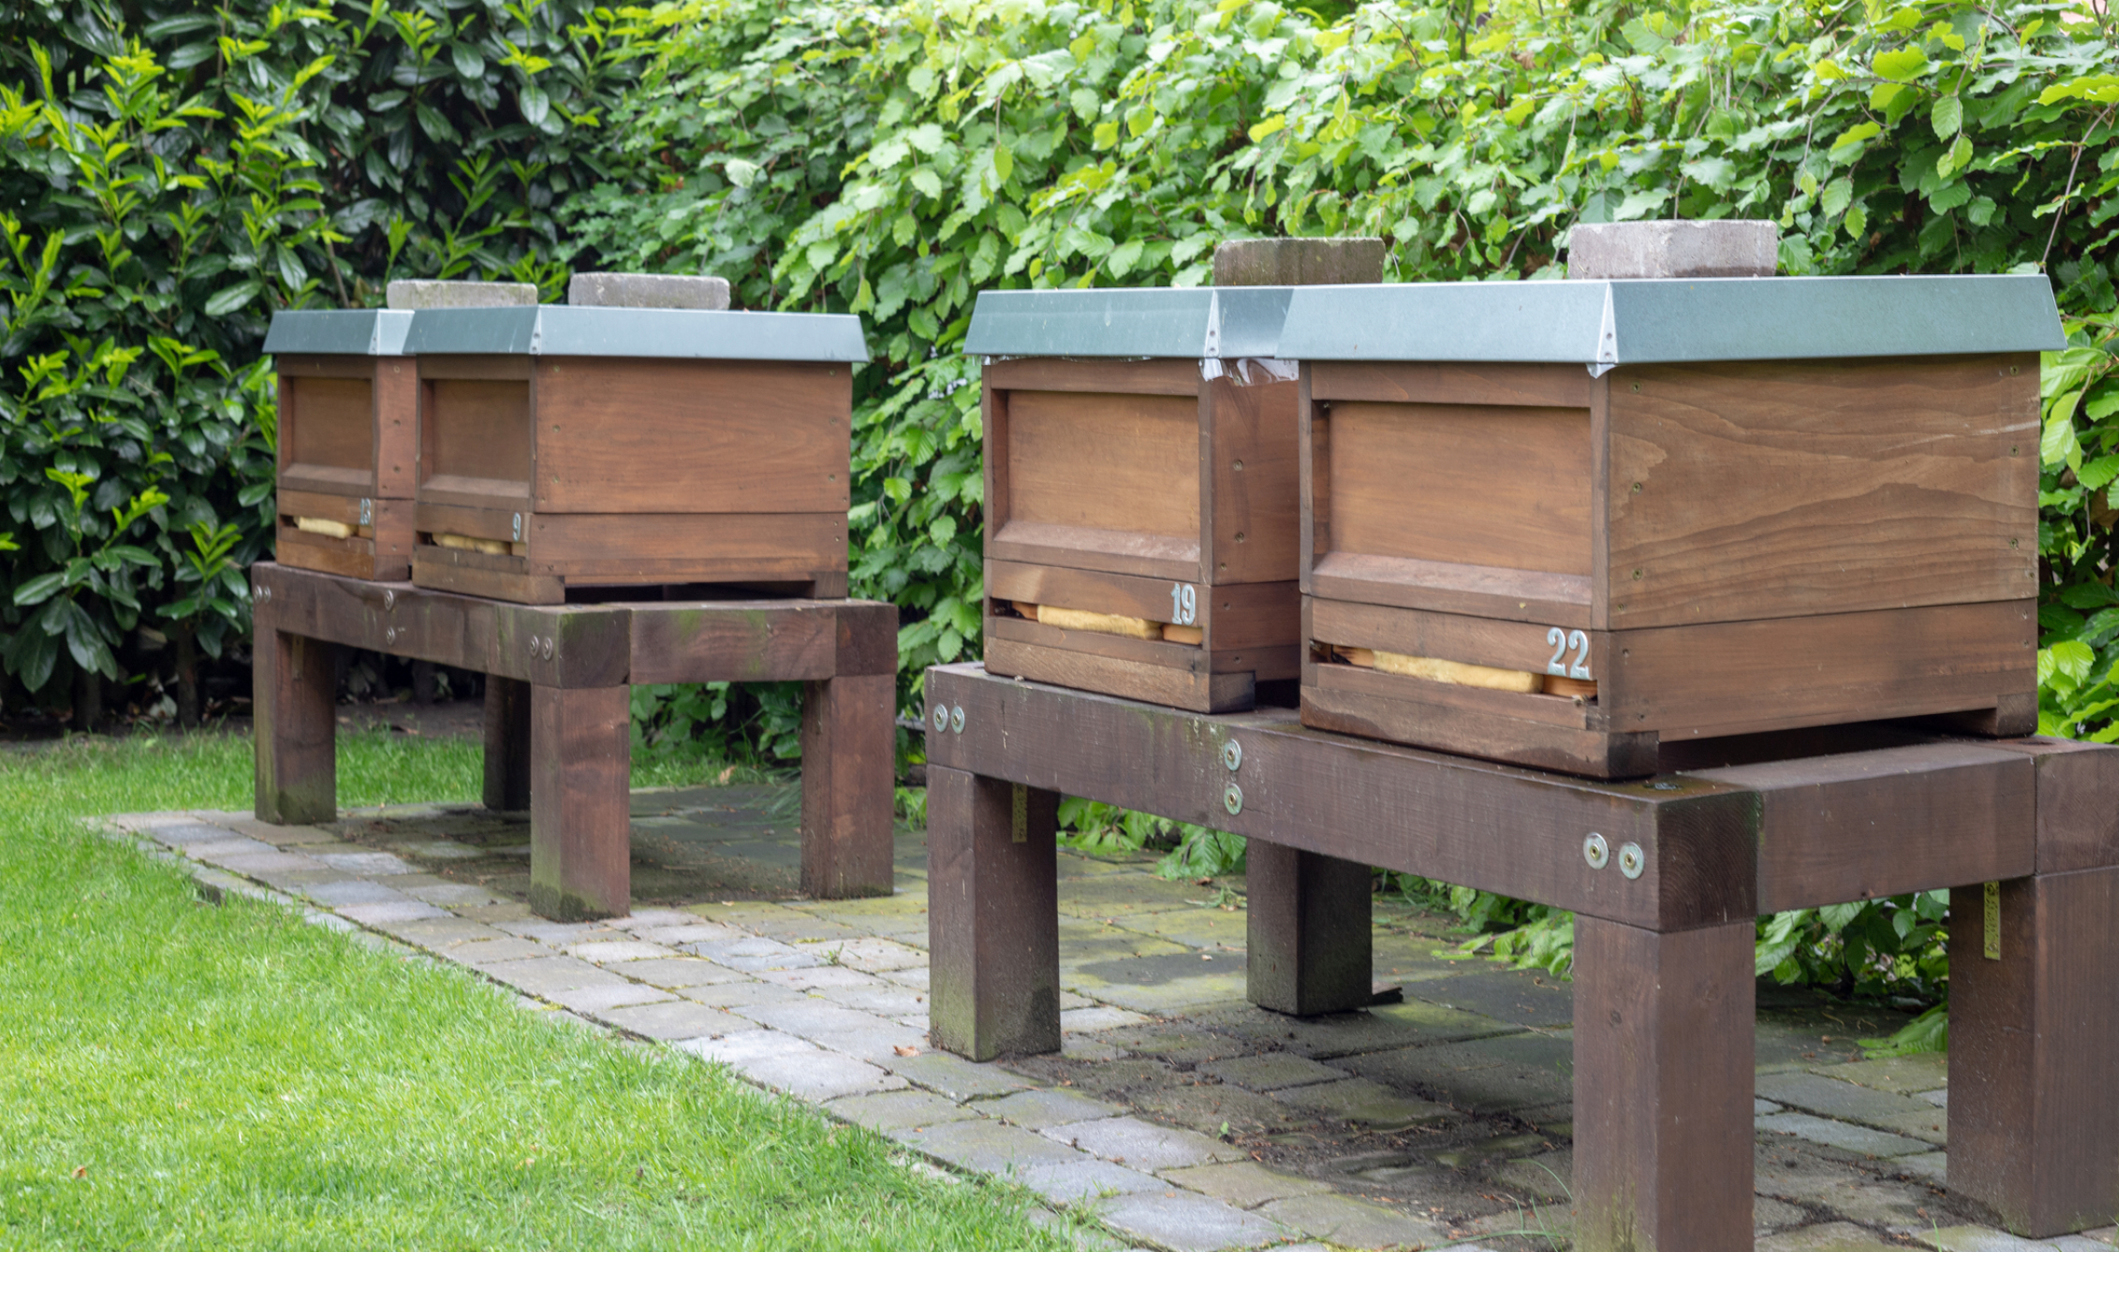 Thriving Hives! Earth Day is April 22nd.